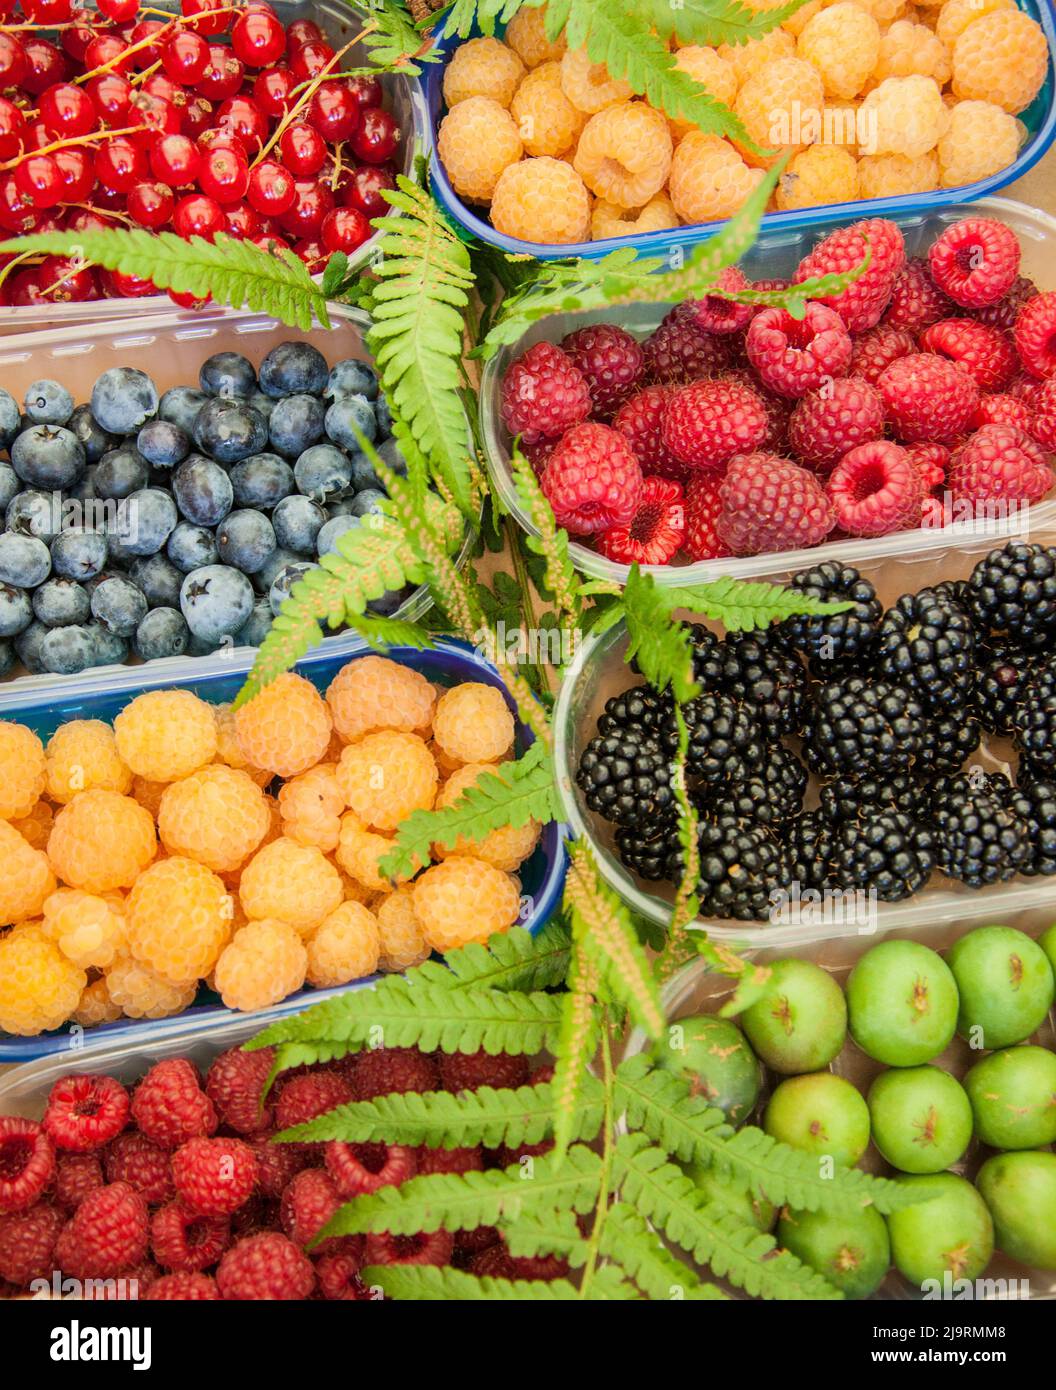 Italy, Venice. A variety of berries on display and for sale in the Rialto Market. Stock Photo